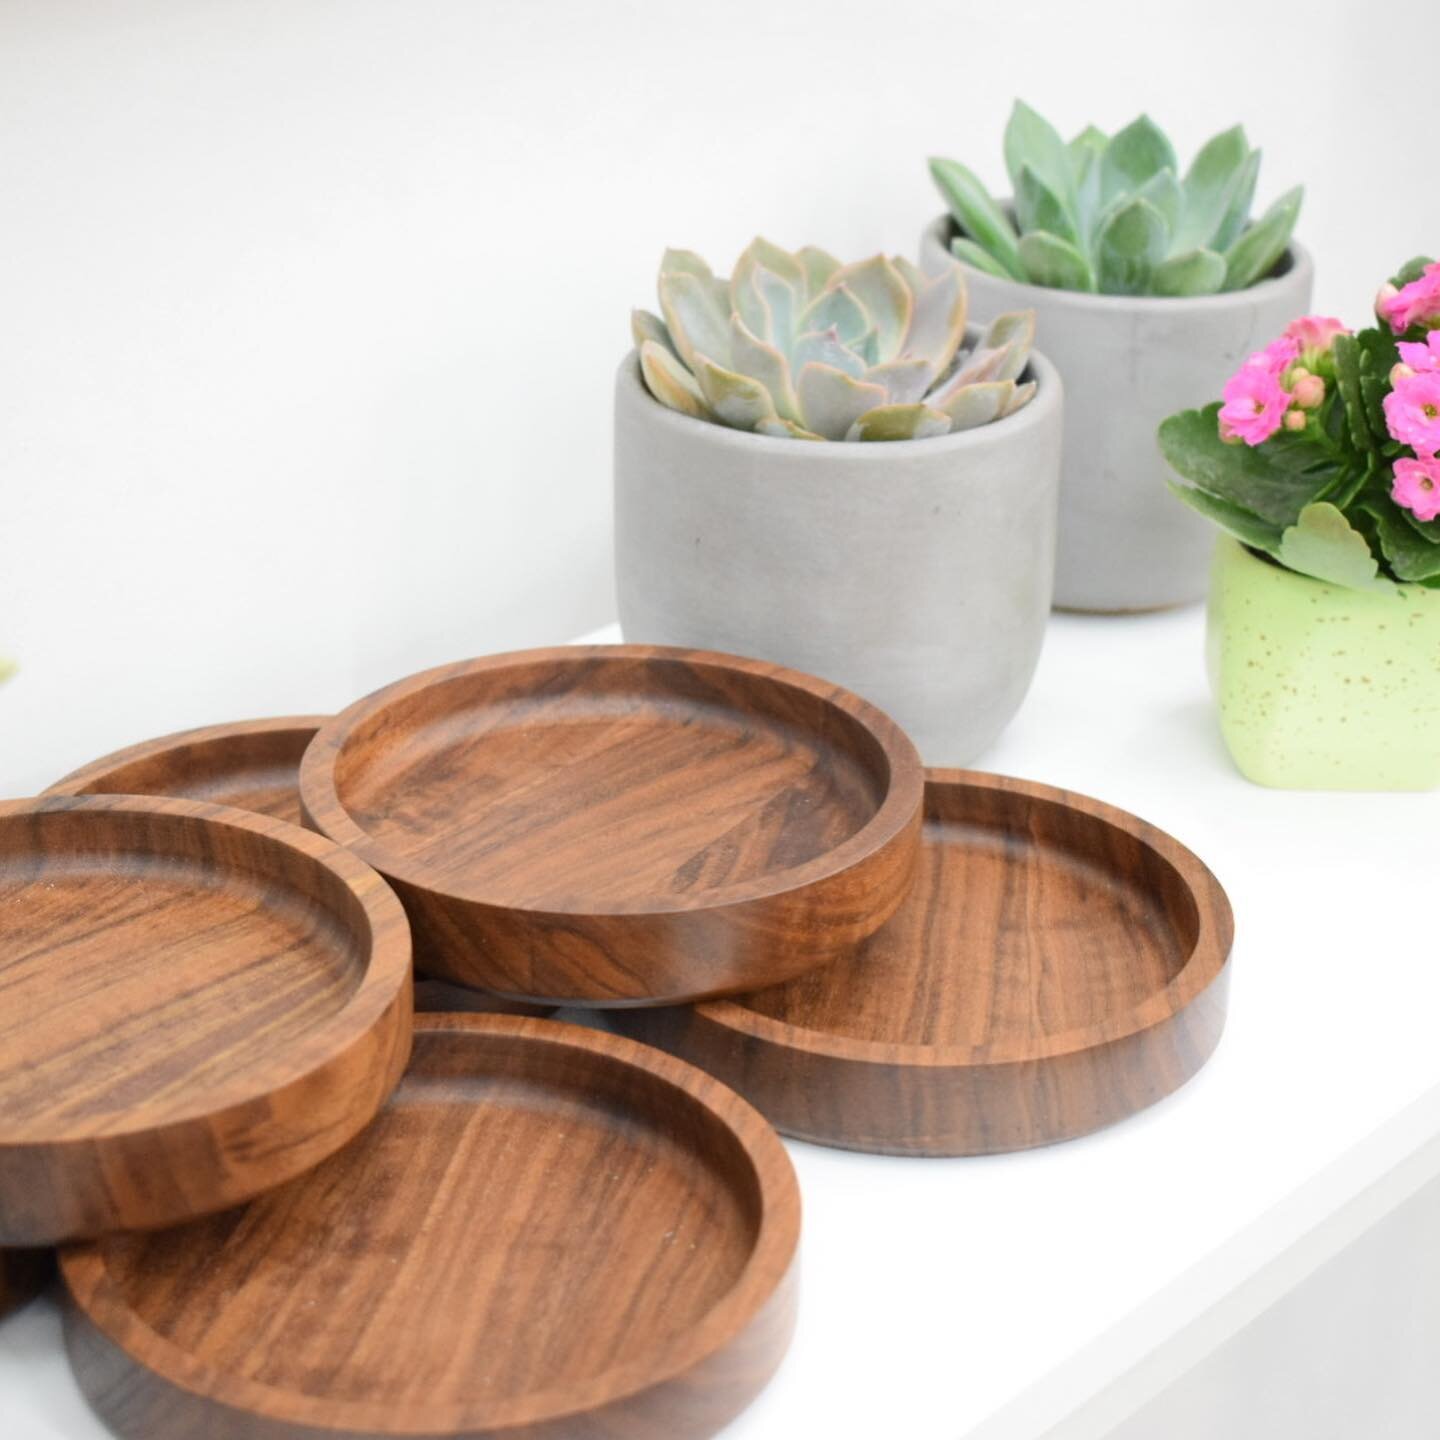 A perfectly practical little dish. And one of the few items already available online. More to come!
.
In the meantime, check out our @savona_woodworks Black Walnut 6&rdquo; Shallow Round!
.
www.jenziohome.com
.
Also available at @shops.paintedtree.sp